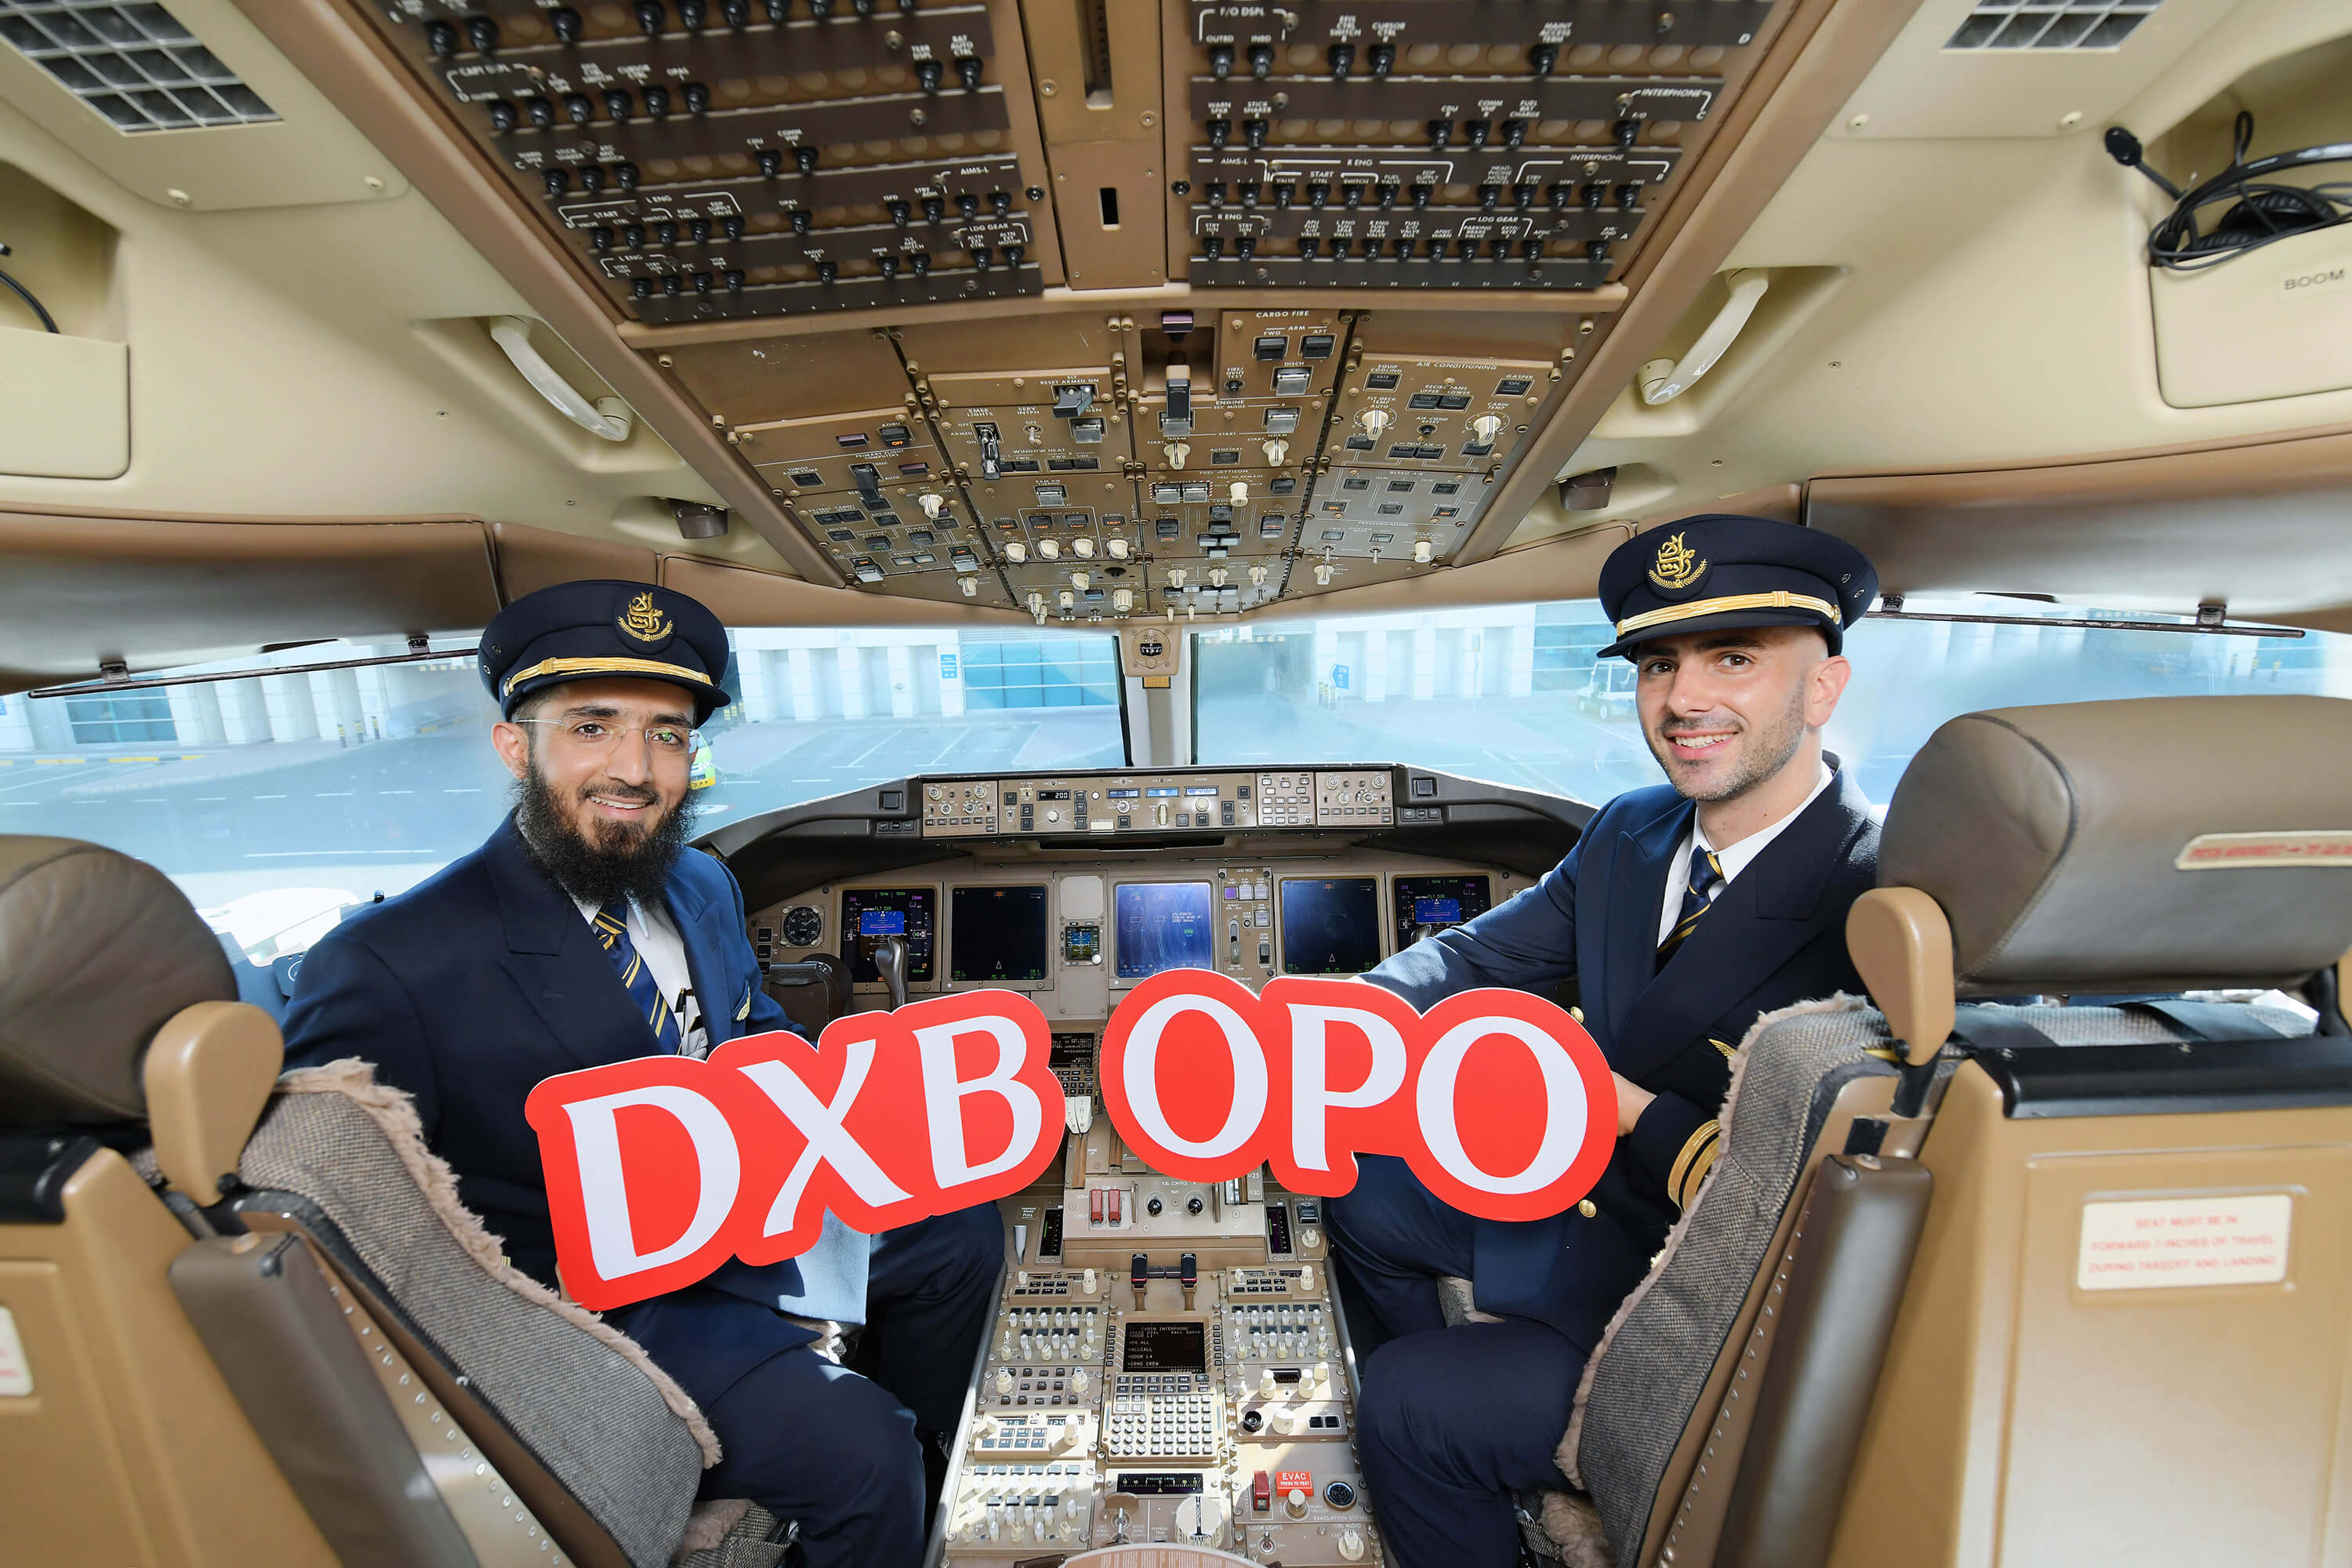 Emirates flight EK197 Dubai- Porto was operated by Captain Ali Al Marzooqi from the UAE and First Officer Daniel Macedo from Portugal